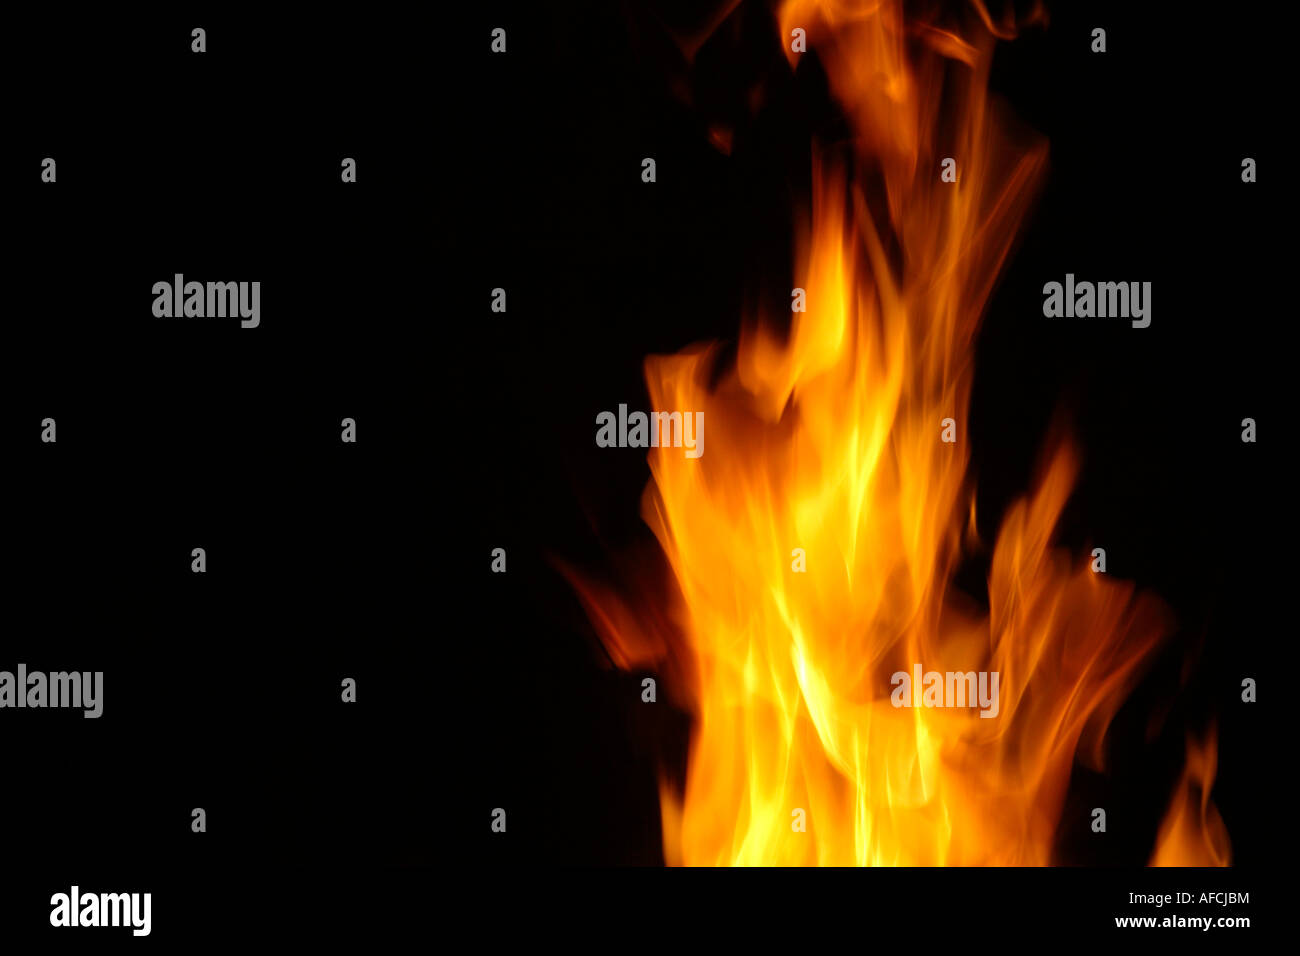 Flames on a black background. Stock Photo